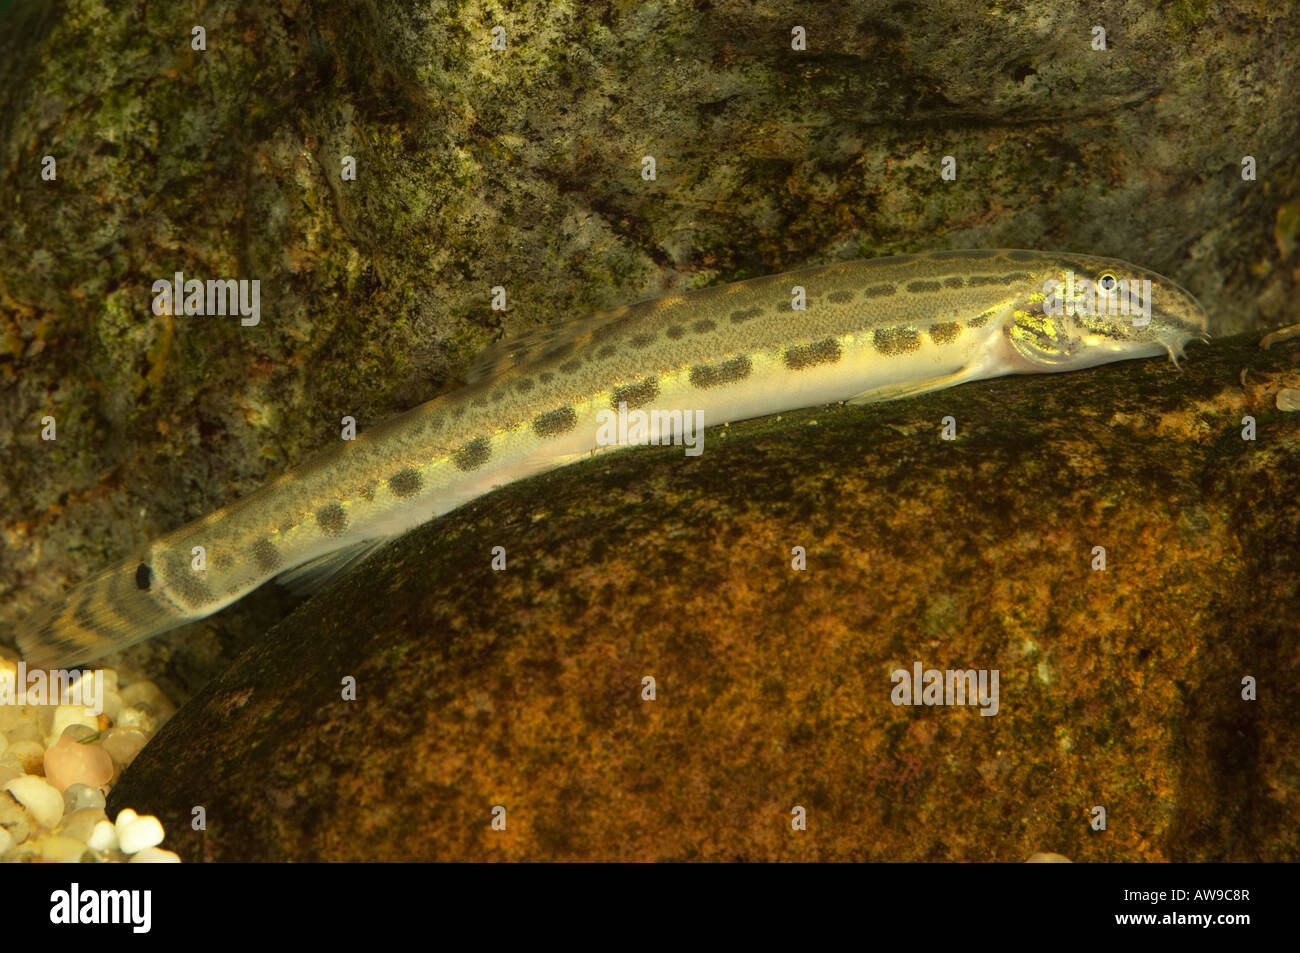 Spined Loach, Cobitis taenia Stock Photo